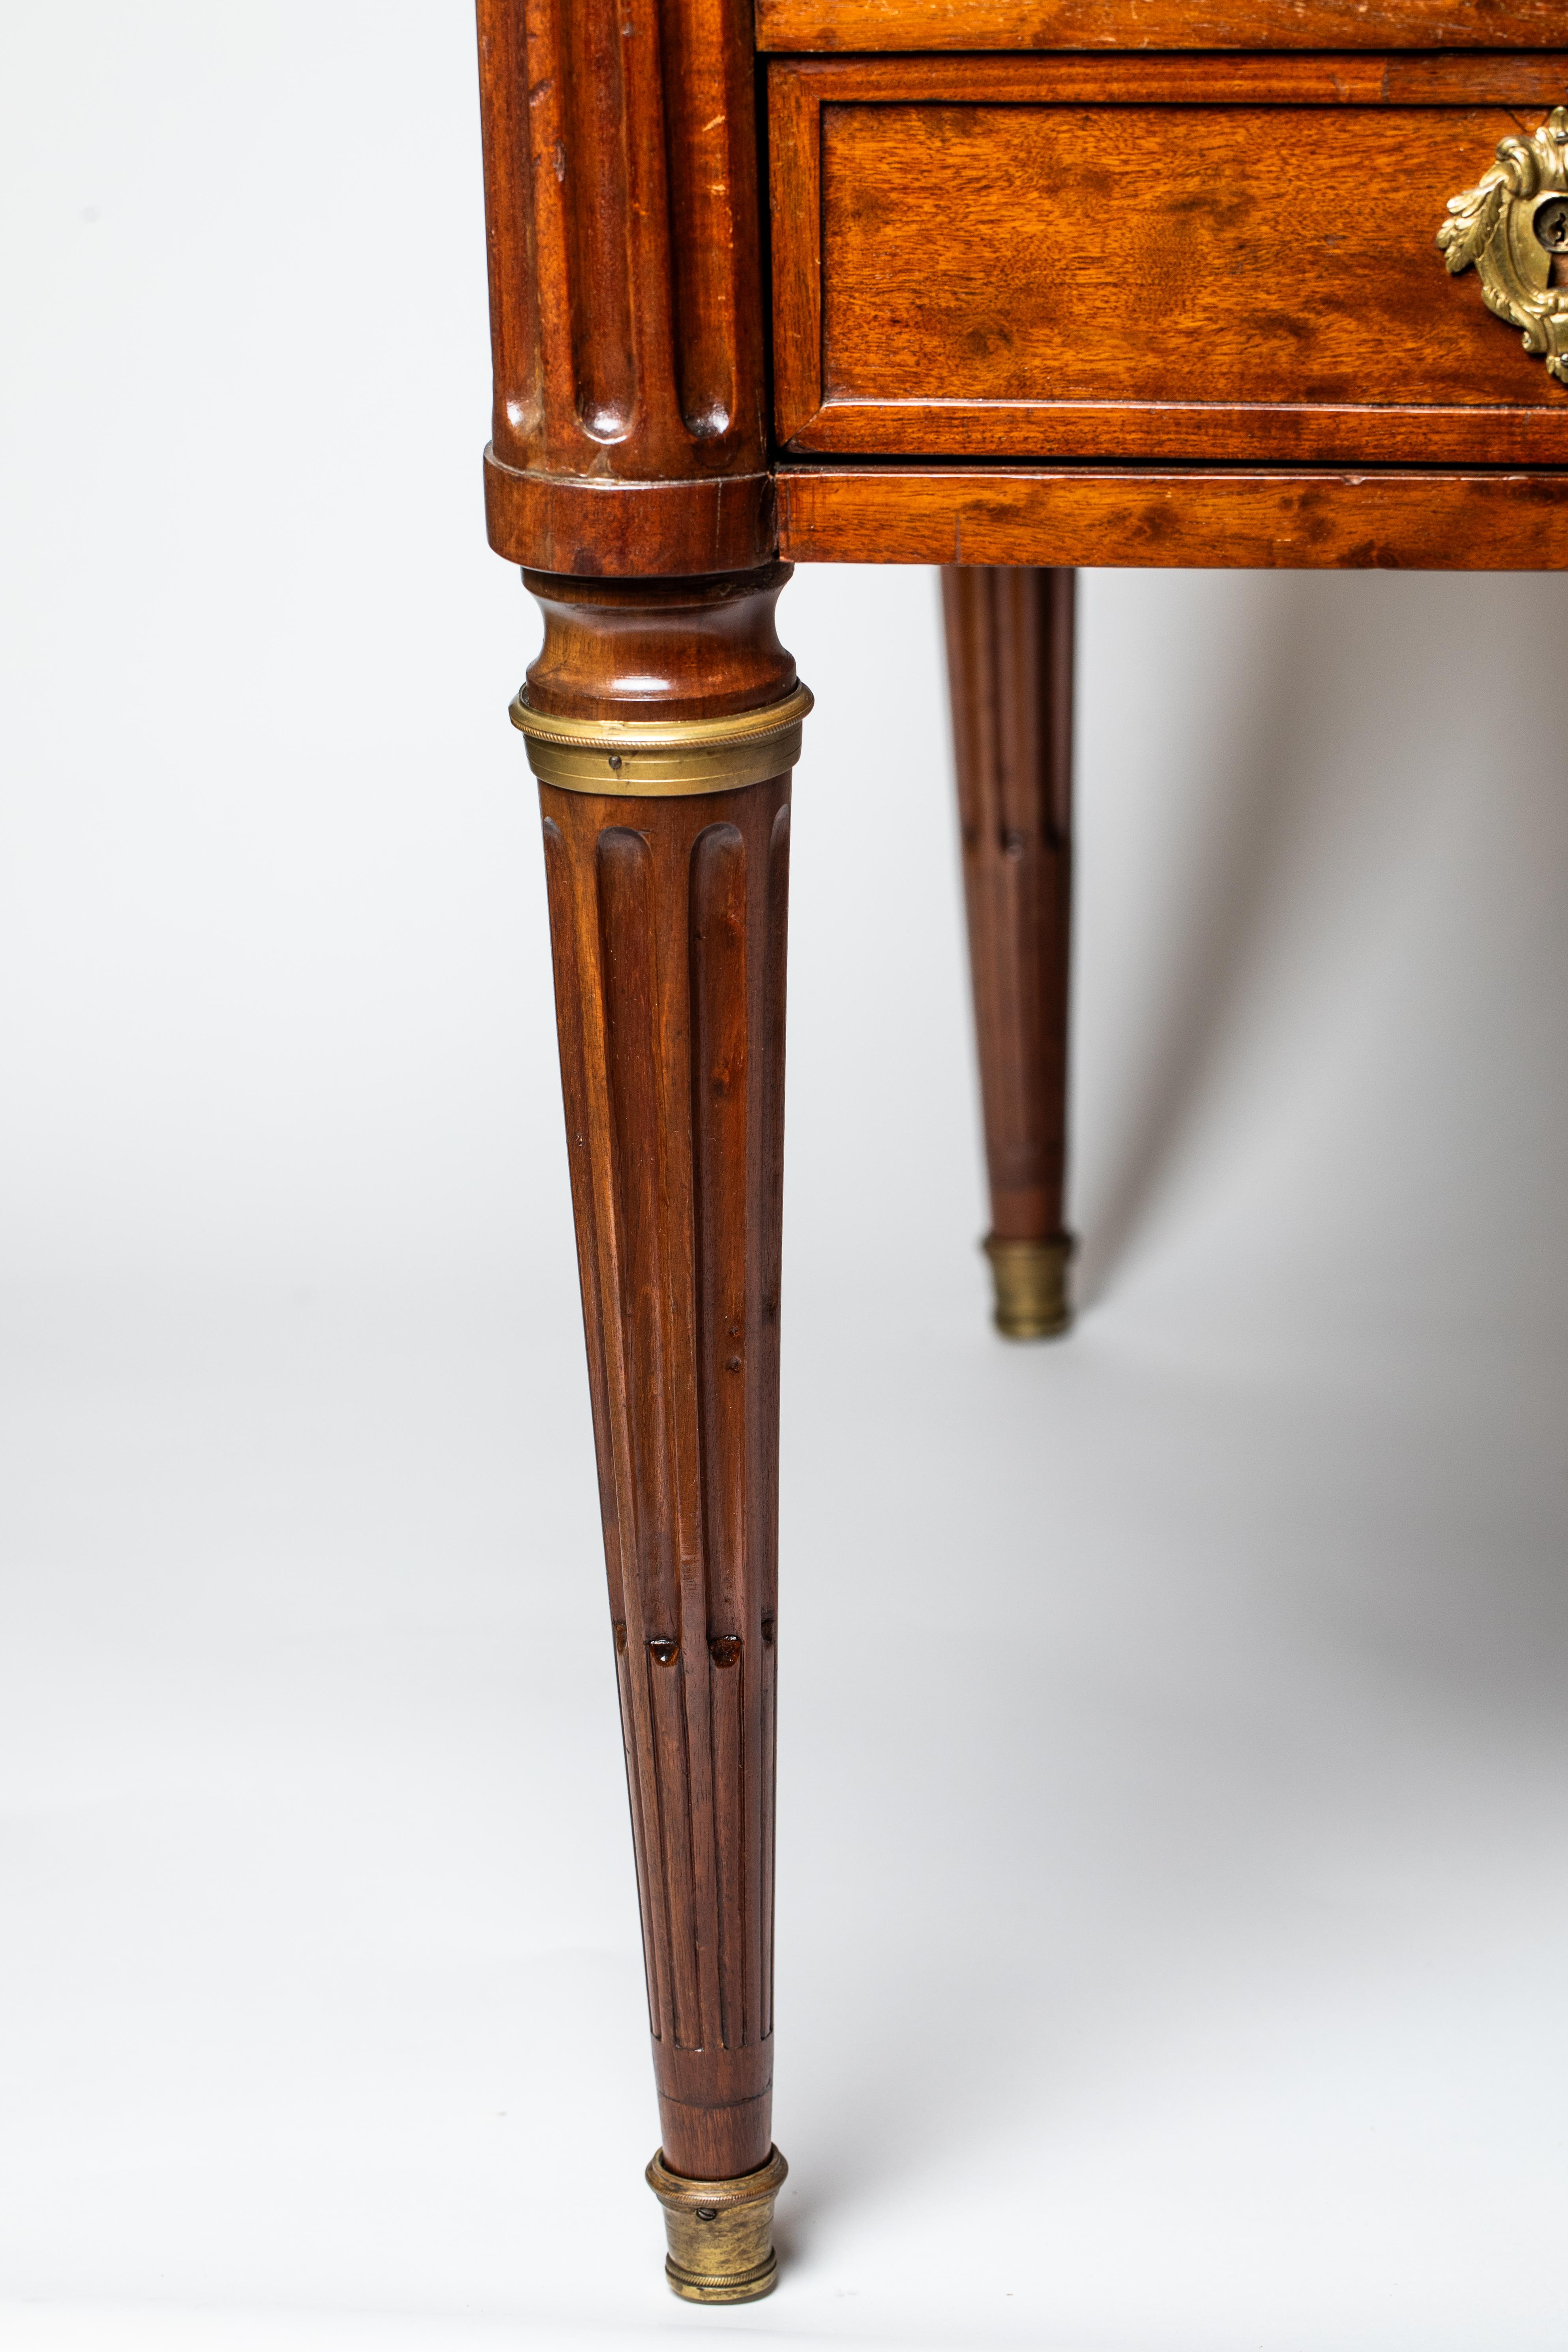 A bureau plat from the late 18th century, made around 1780 in the French style, epitomises the timeless elegance and craftsmanship of furniture design from this era. Made from fine mahogany, a popular wood of the era, this piece of furniture exudes